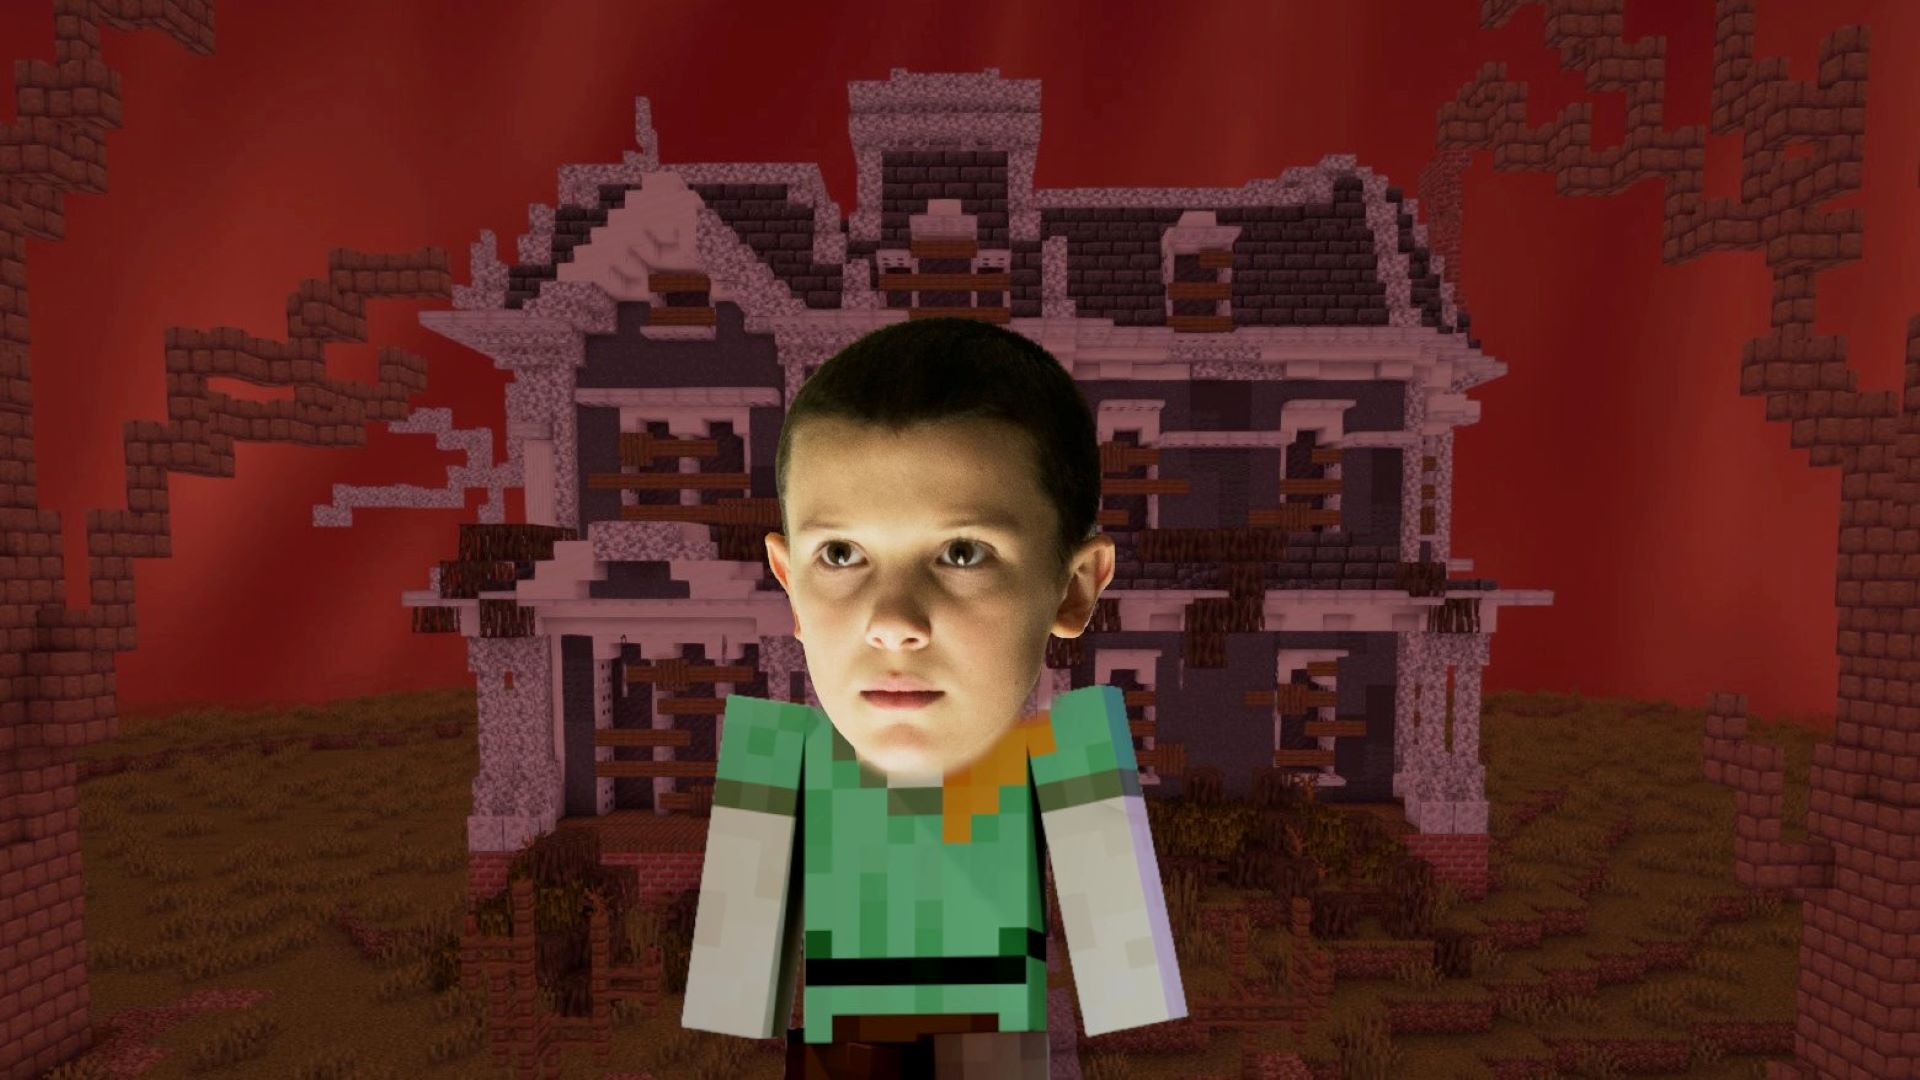 Minecraft is becoming a Netflix series, and Stranger Things is becoming game